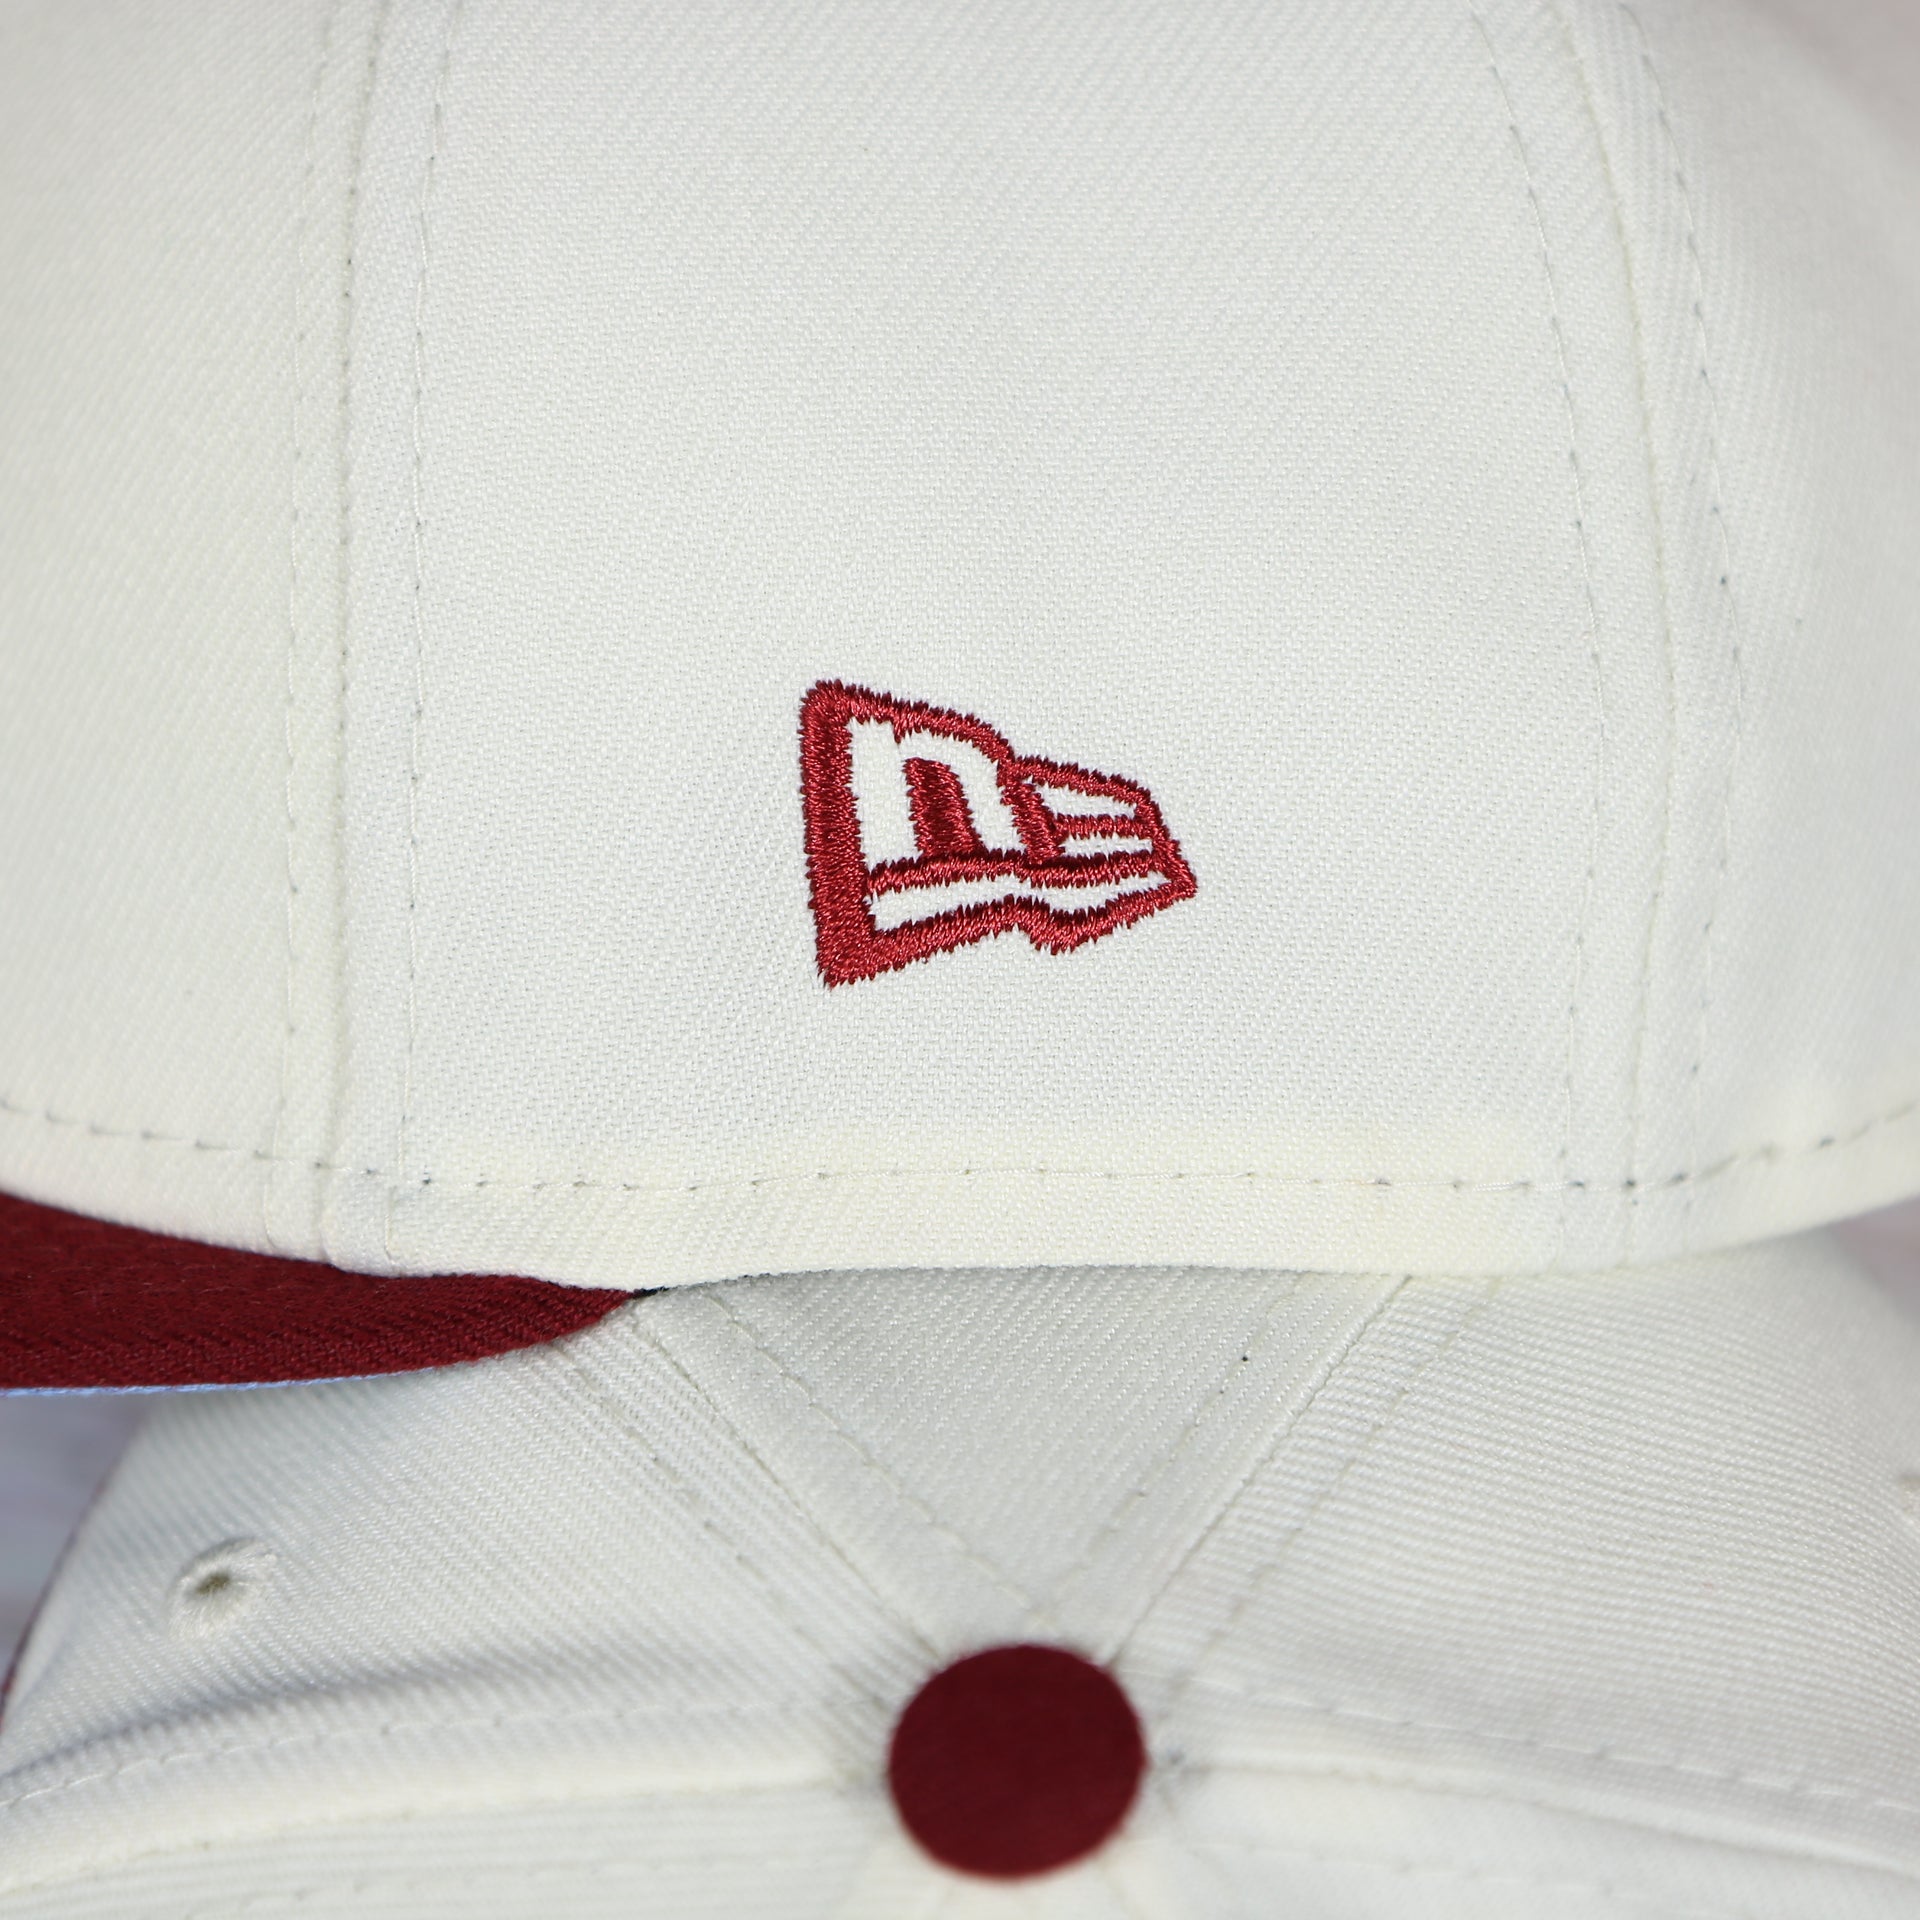 New Era logo close up on the Philadelphia Phillies Cooperstown City Hall Logo Veterans Stadium Side Patch Powder Blue UV 59Fifty Fitted Cap | Chrome/Maroon Cap Swag Exclusive